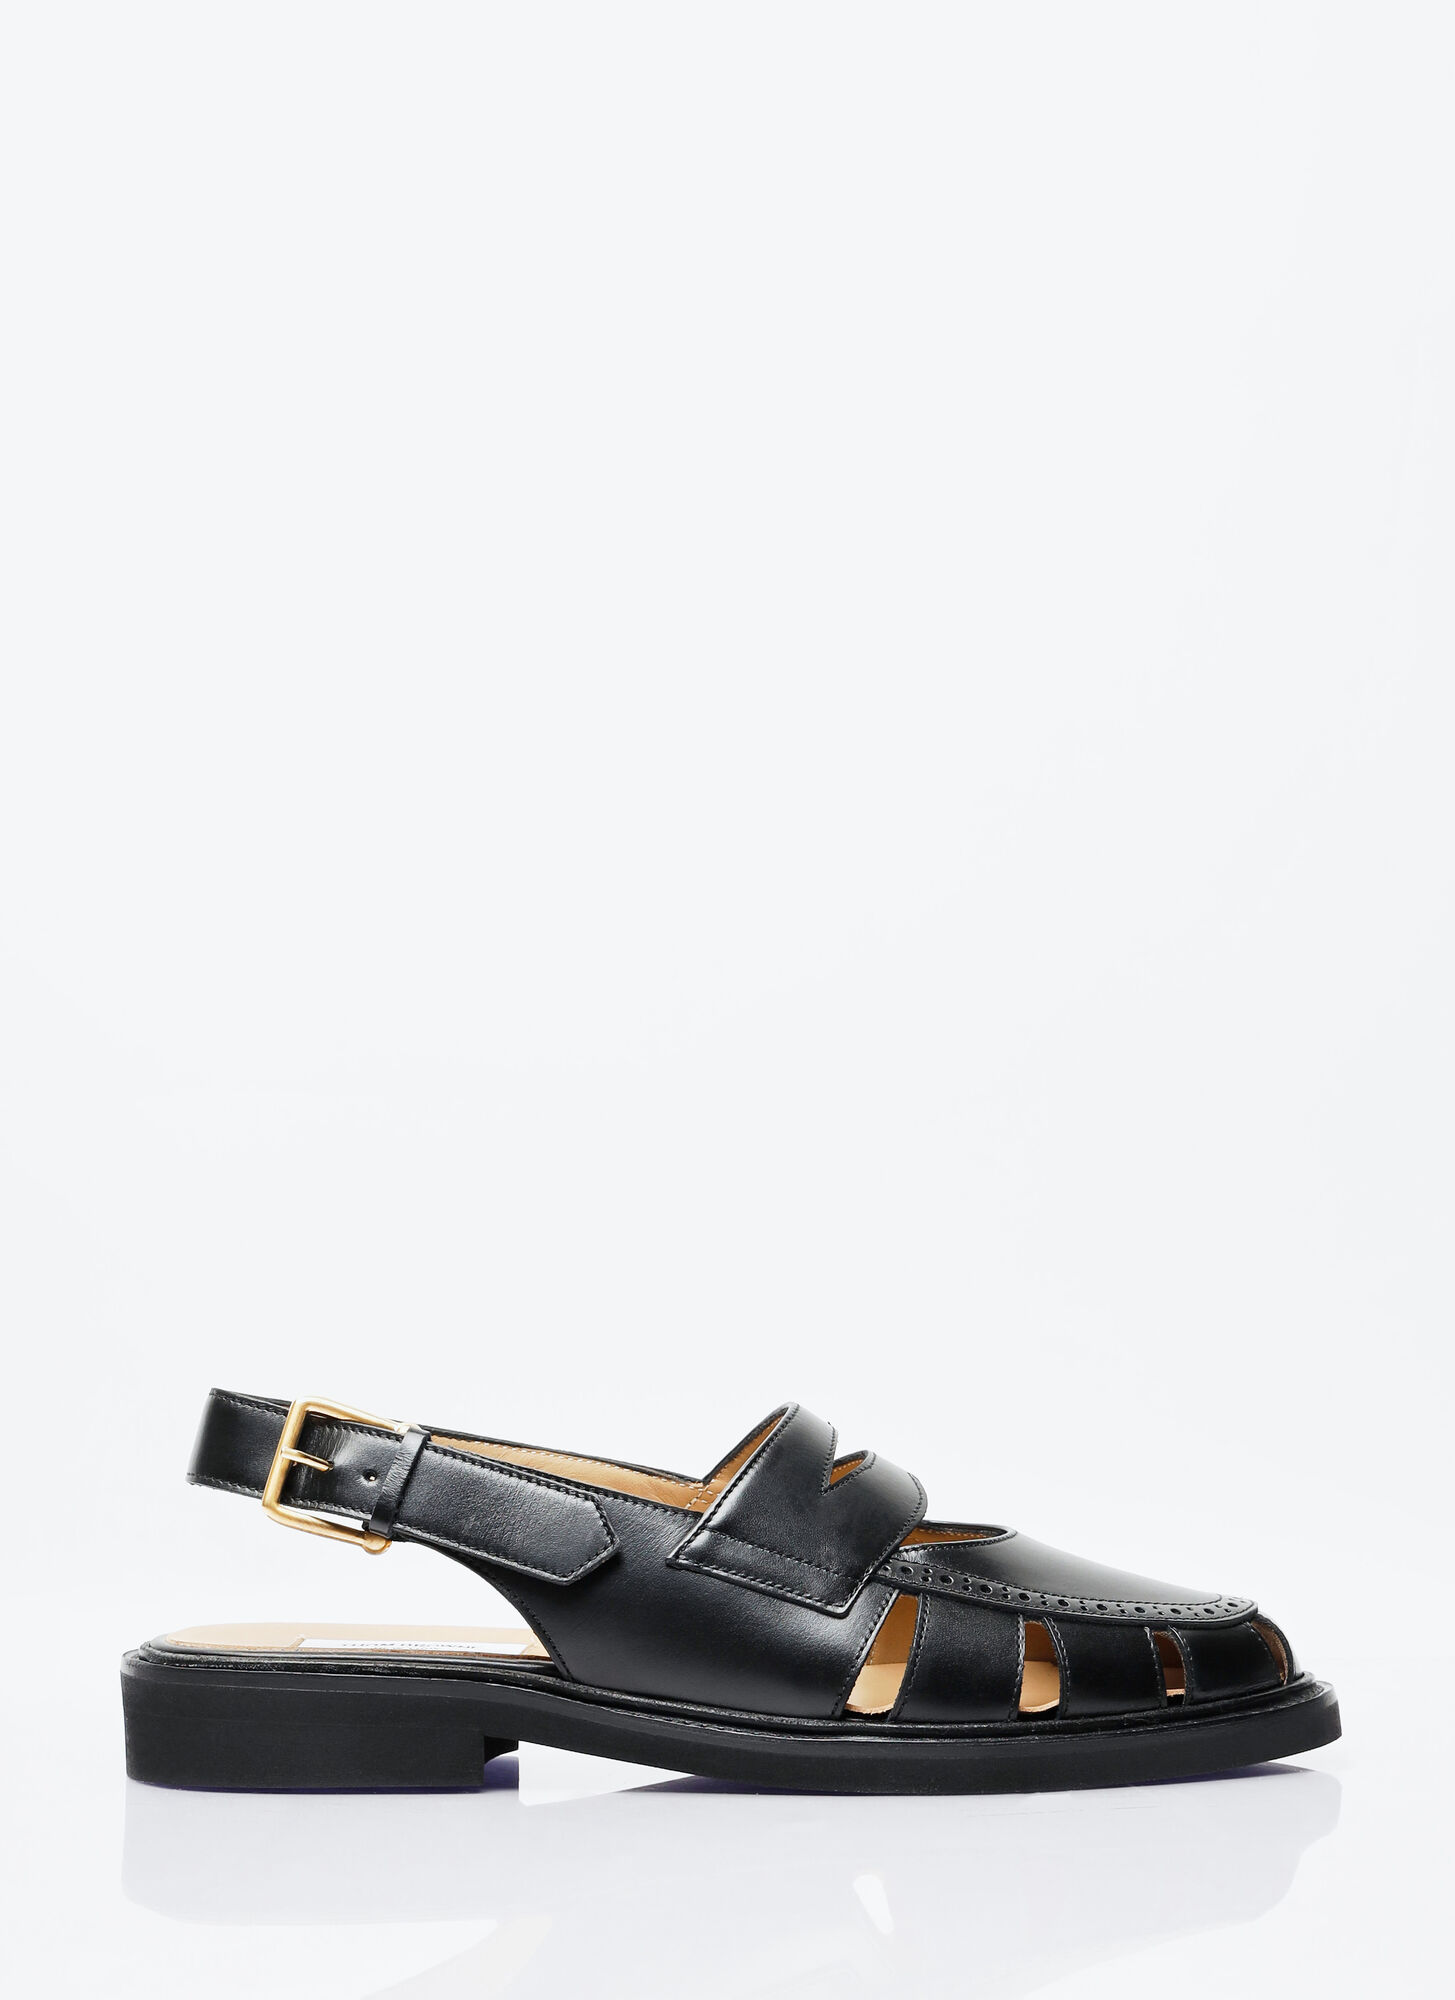 Thom Browne Cut-out Slingback Loafer Sandals In Black